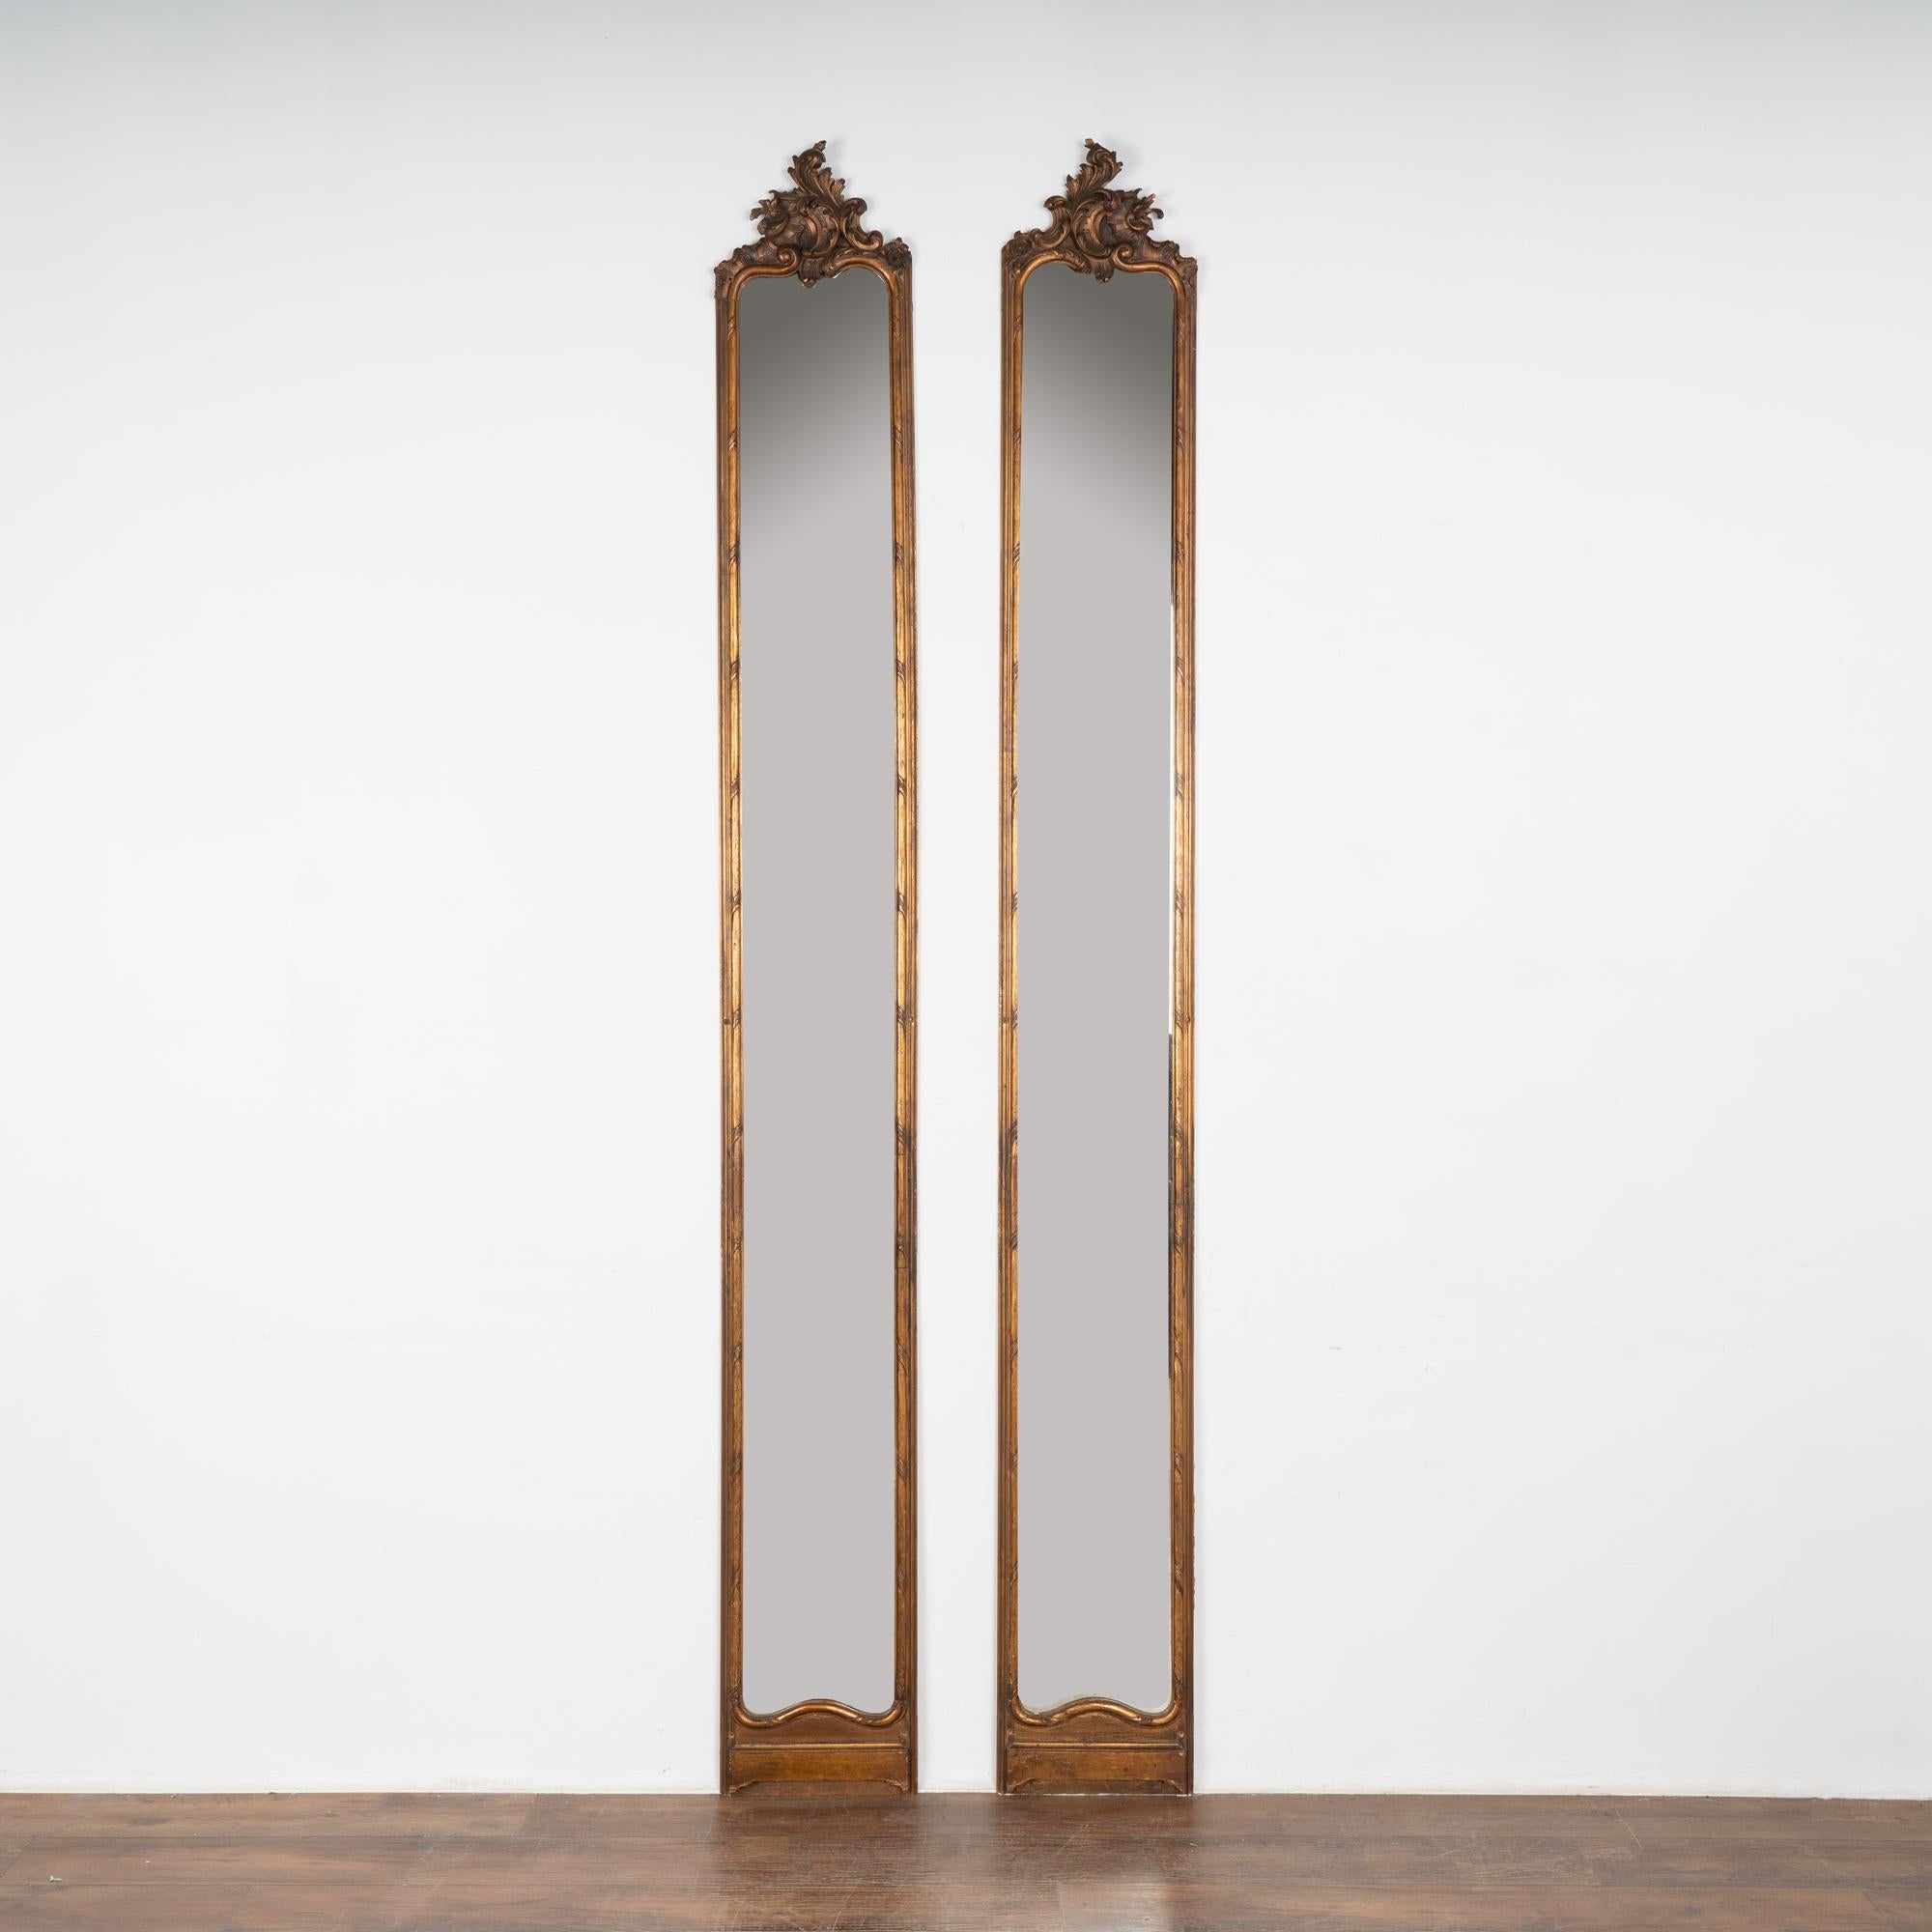 Rare pair of exceptionally tall, narrow mirrors crowned with carved flourish and bronze gilt finish.
Original distressed glass plates, still usable and elegant in length. Holes in each frame which prior owners used to hang each.
All scratches,